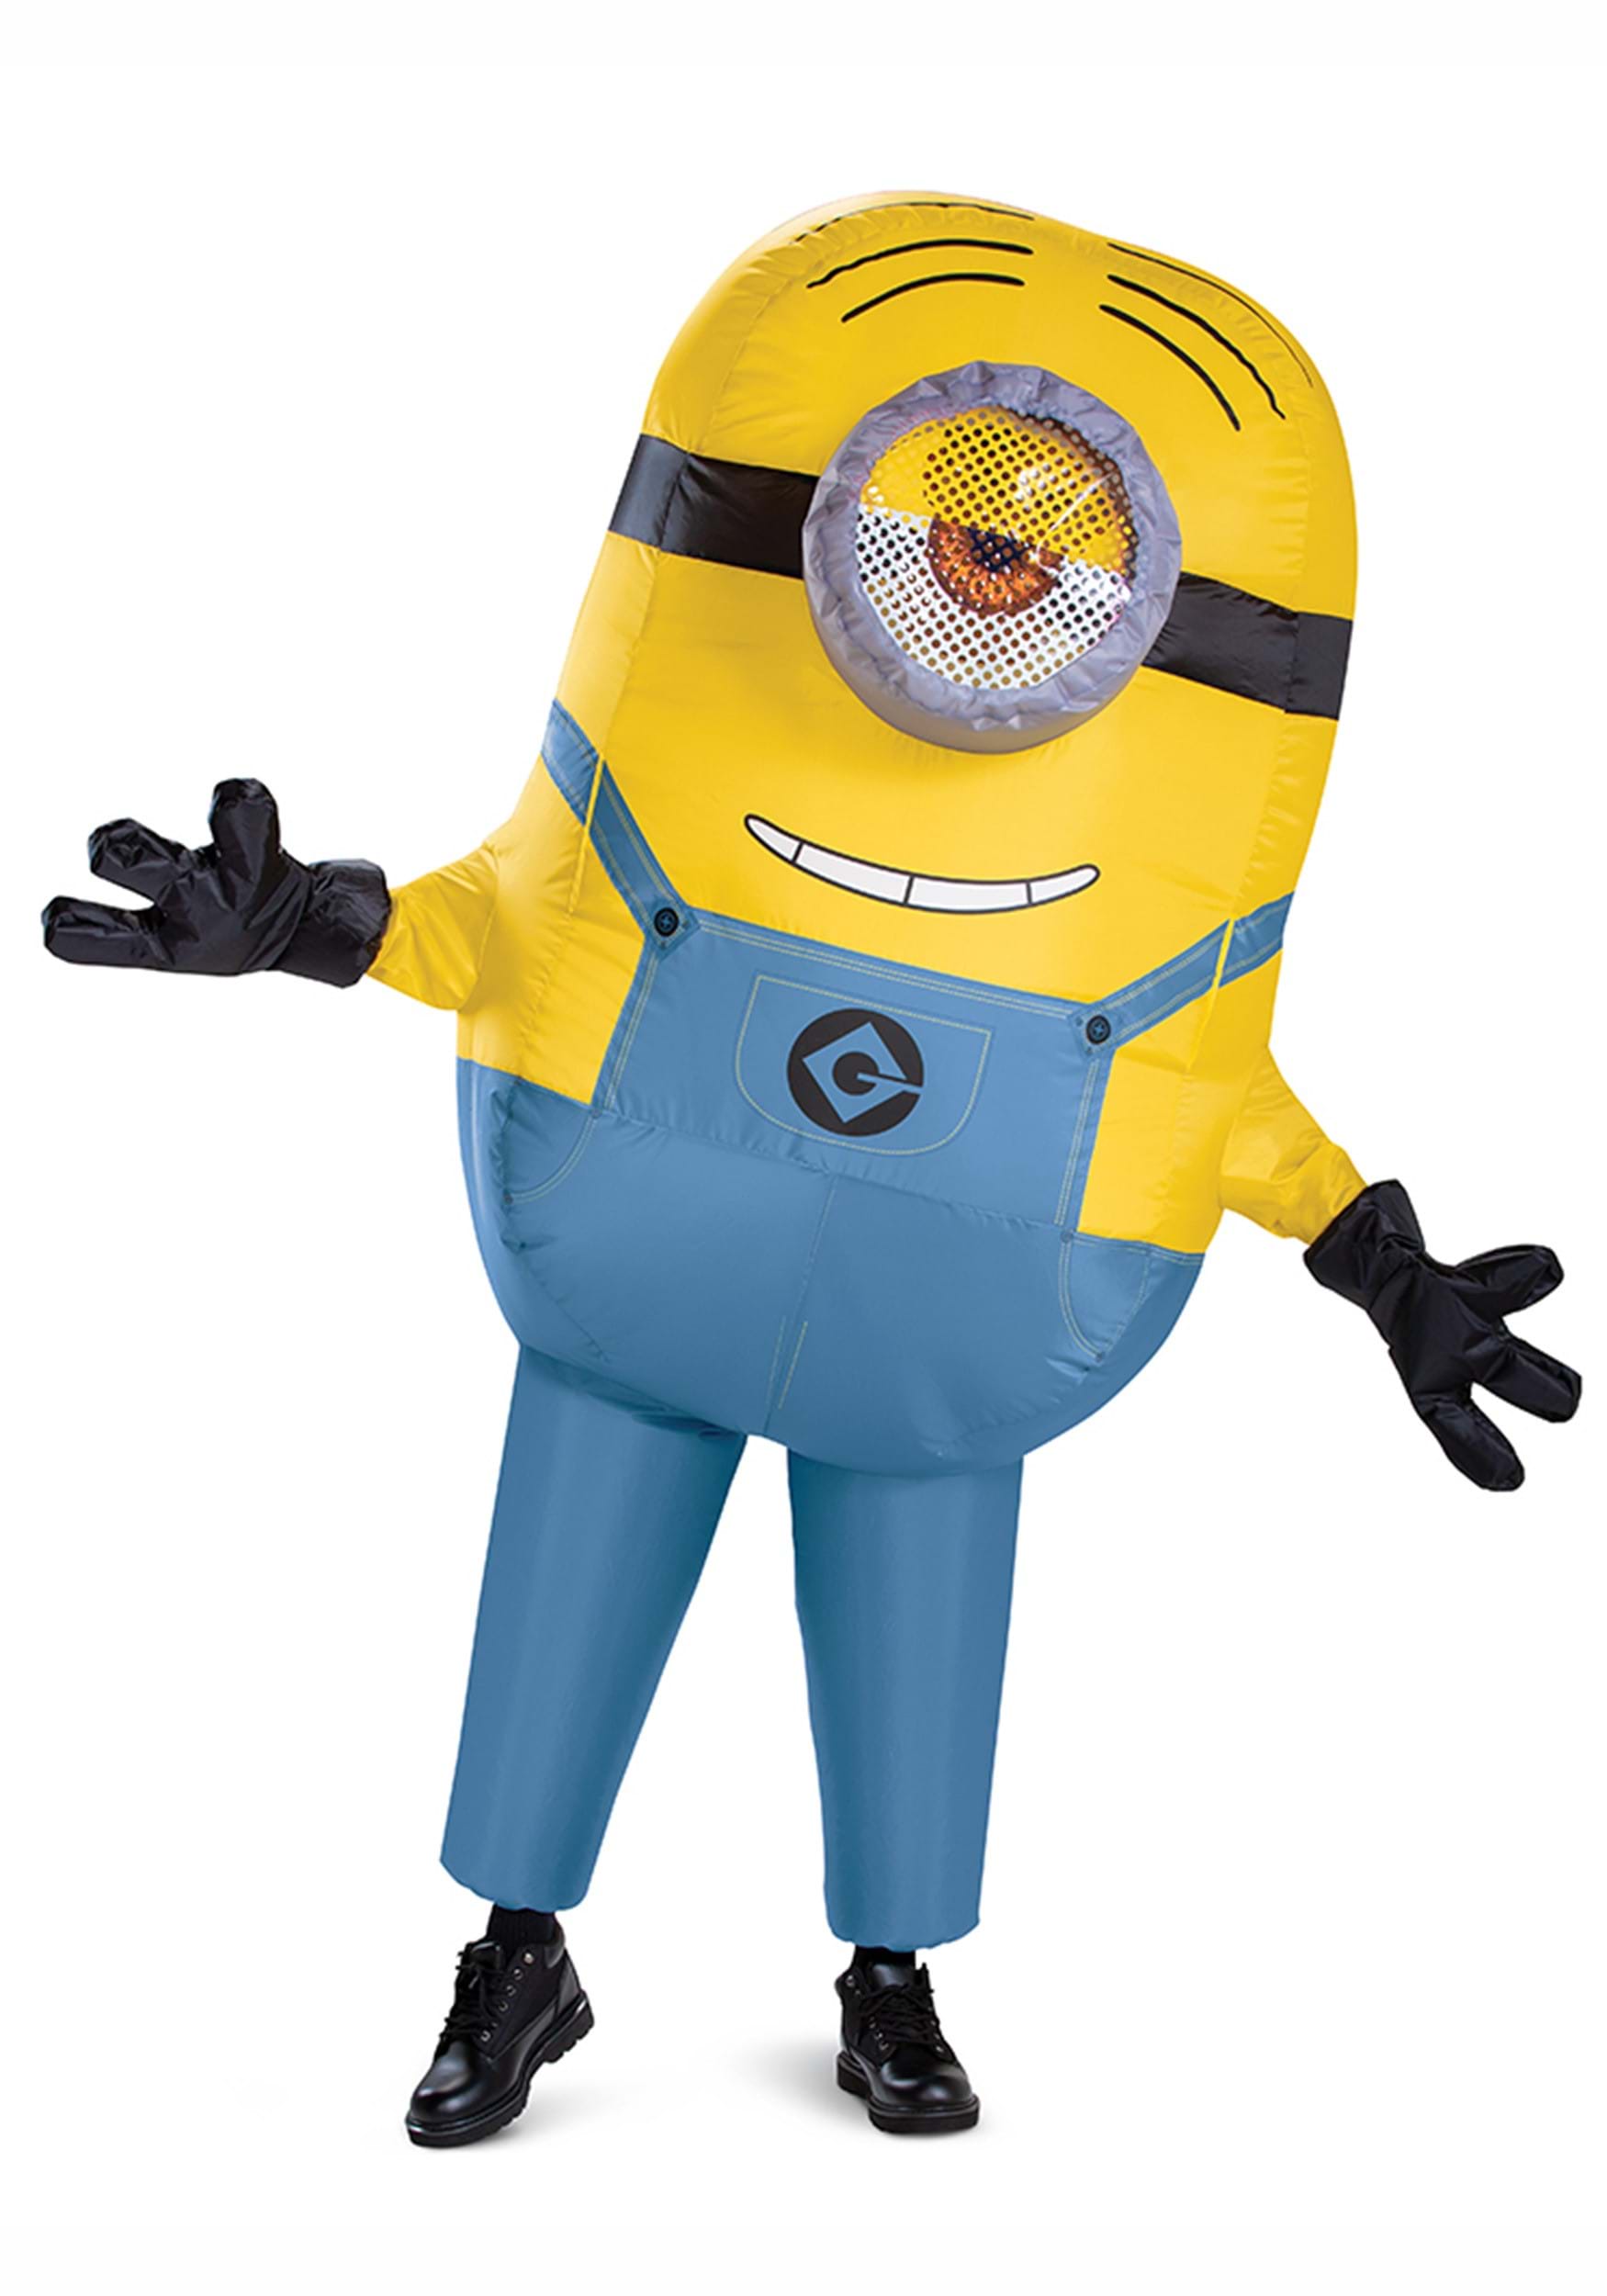 Inflatable Minion Costume for Adults